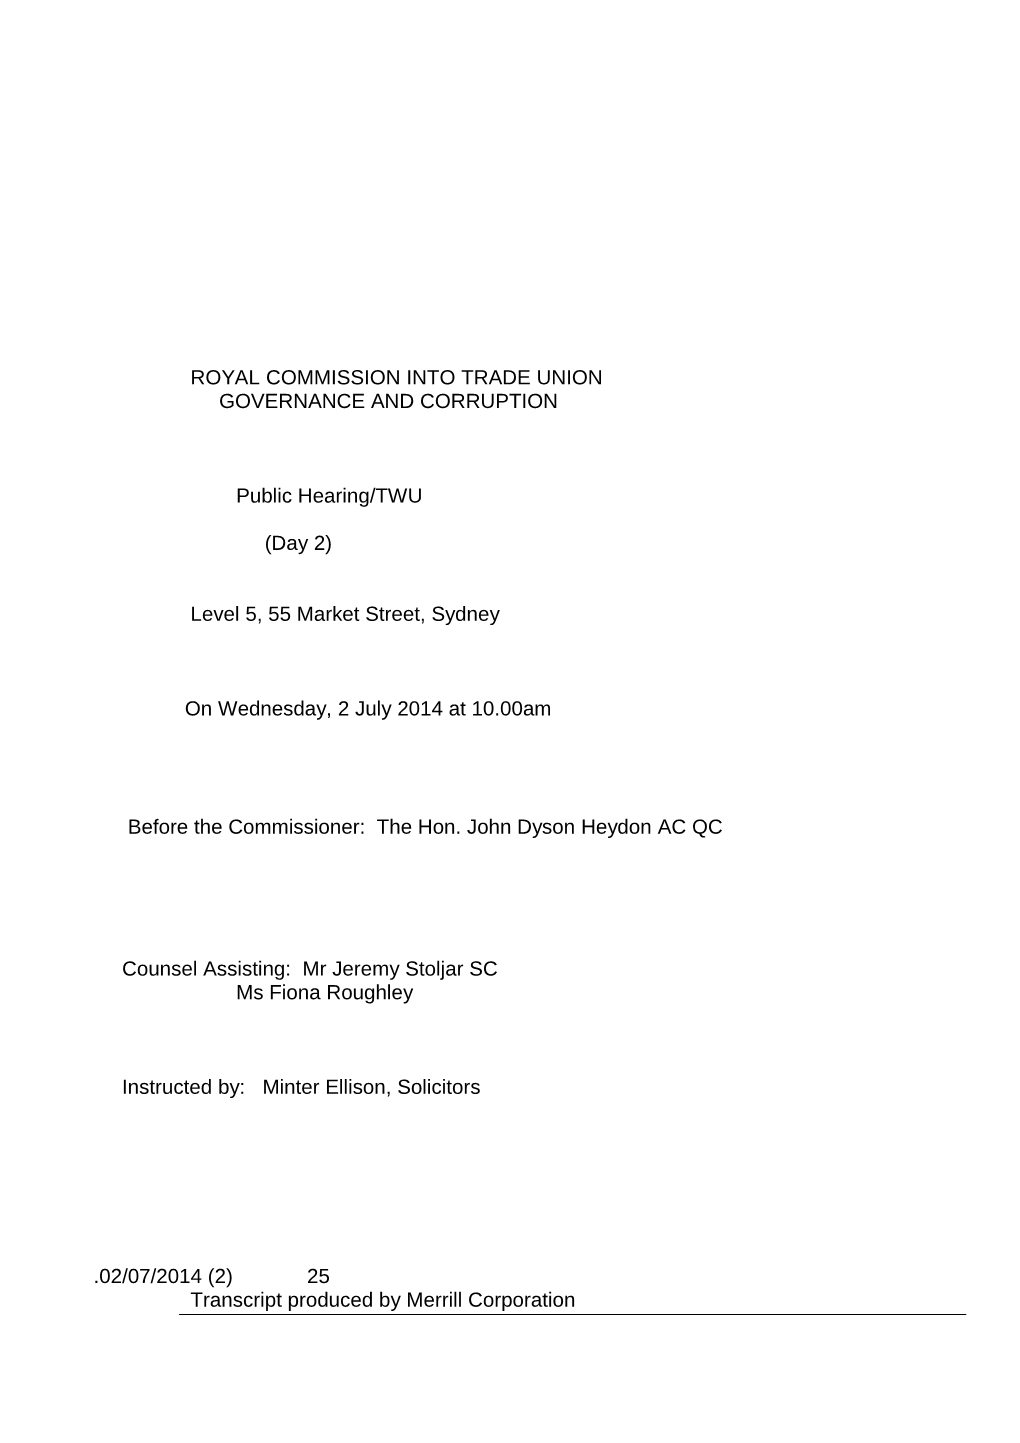 Royal Commission Into Trade Union Governance and Corruption Public Hearing/Twu 2 July 2014